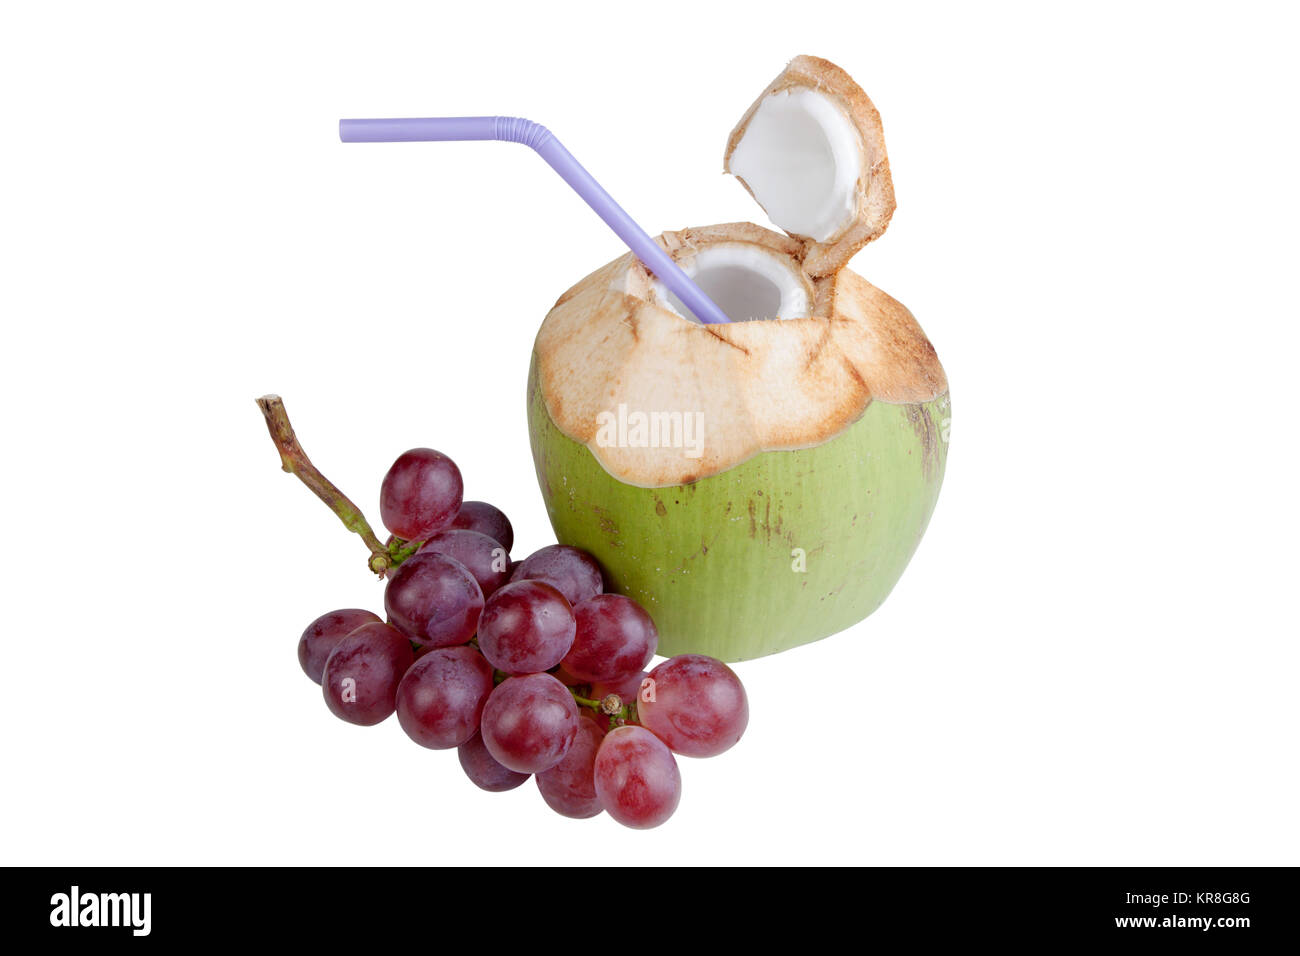 Coconut water drink and red grapes Stock Photo